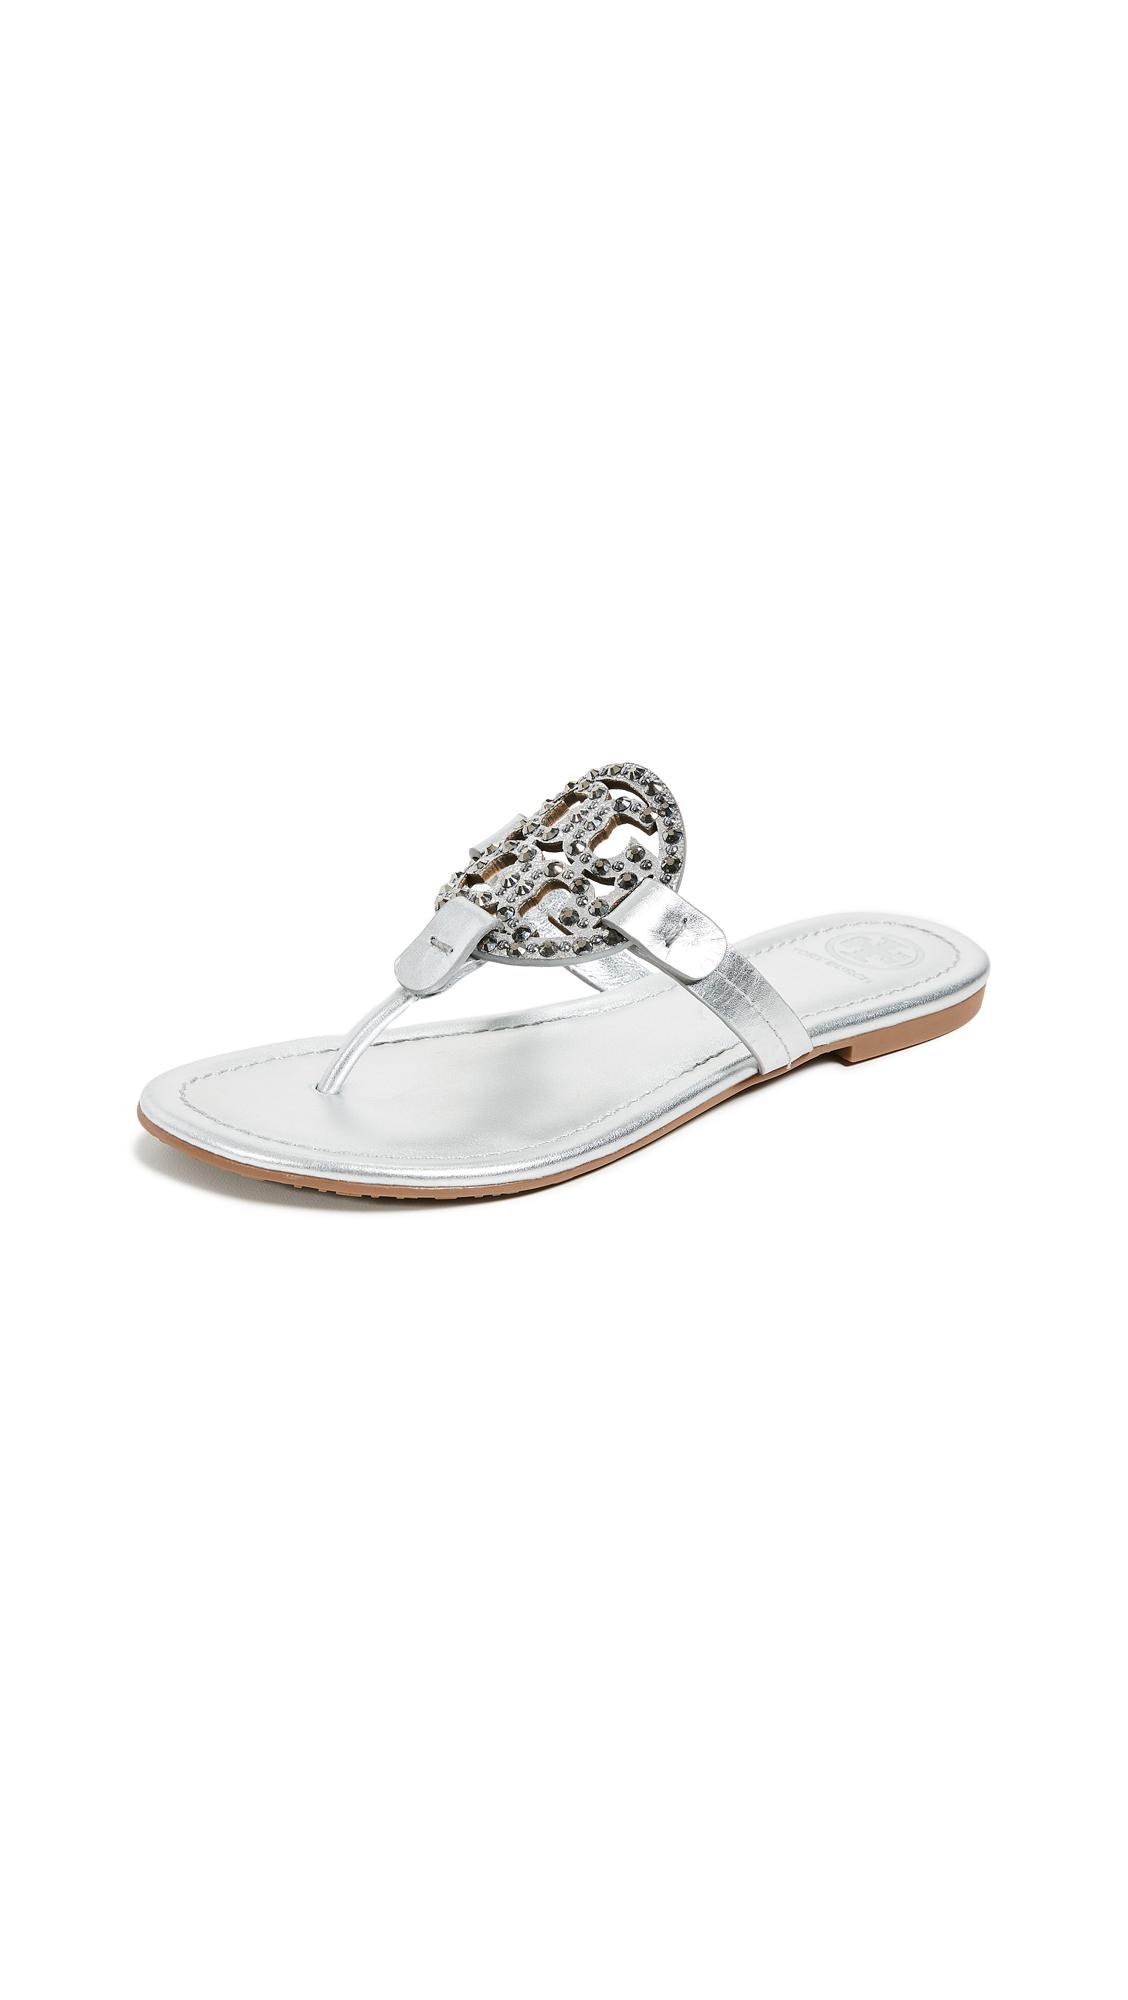 Tory Burch Women's Miller Embellished Thong Sandals in Metallic | Lyst